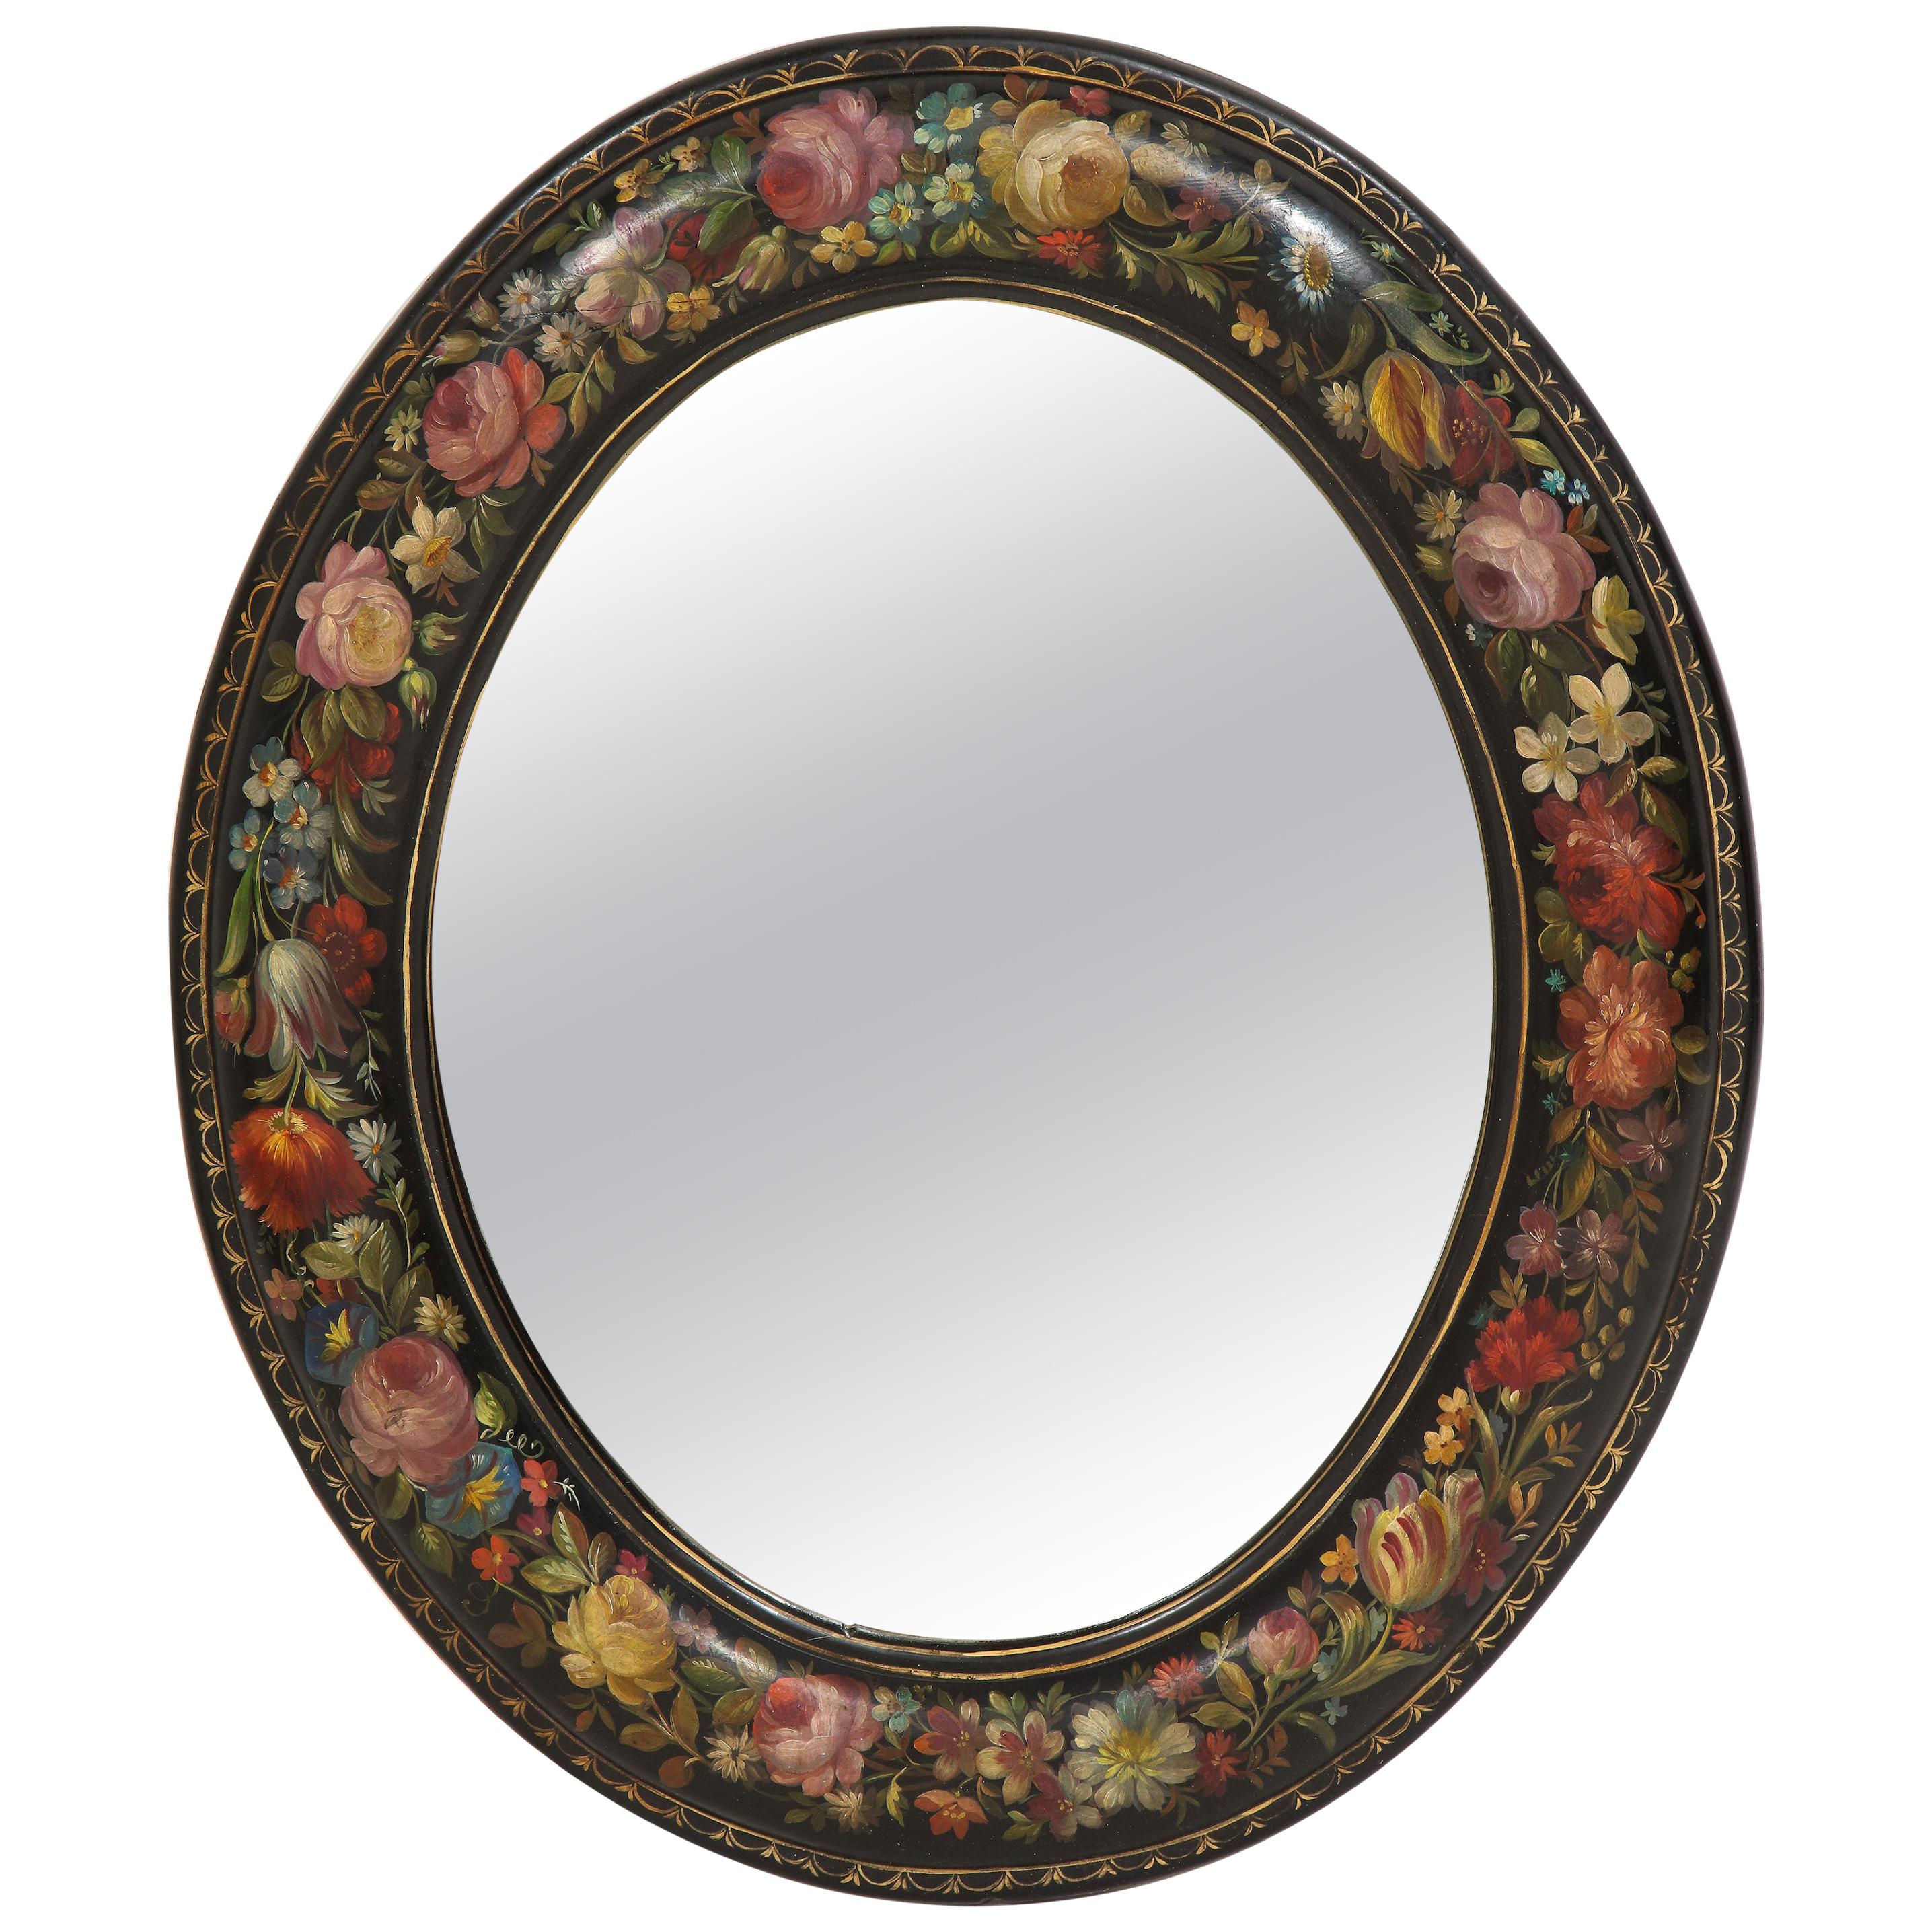 Victorian Oval Black and Polychrome Mirror